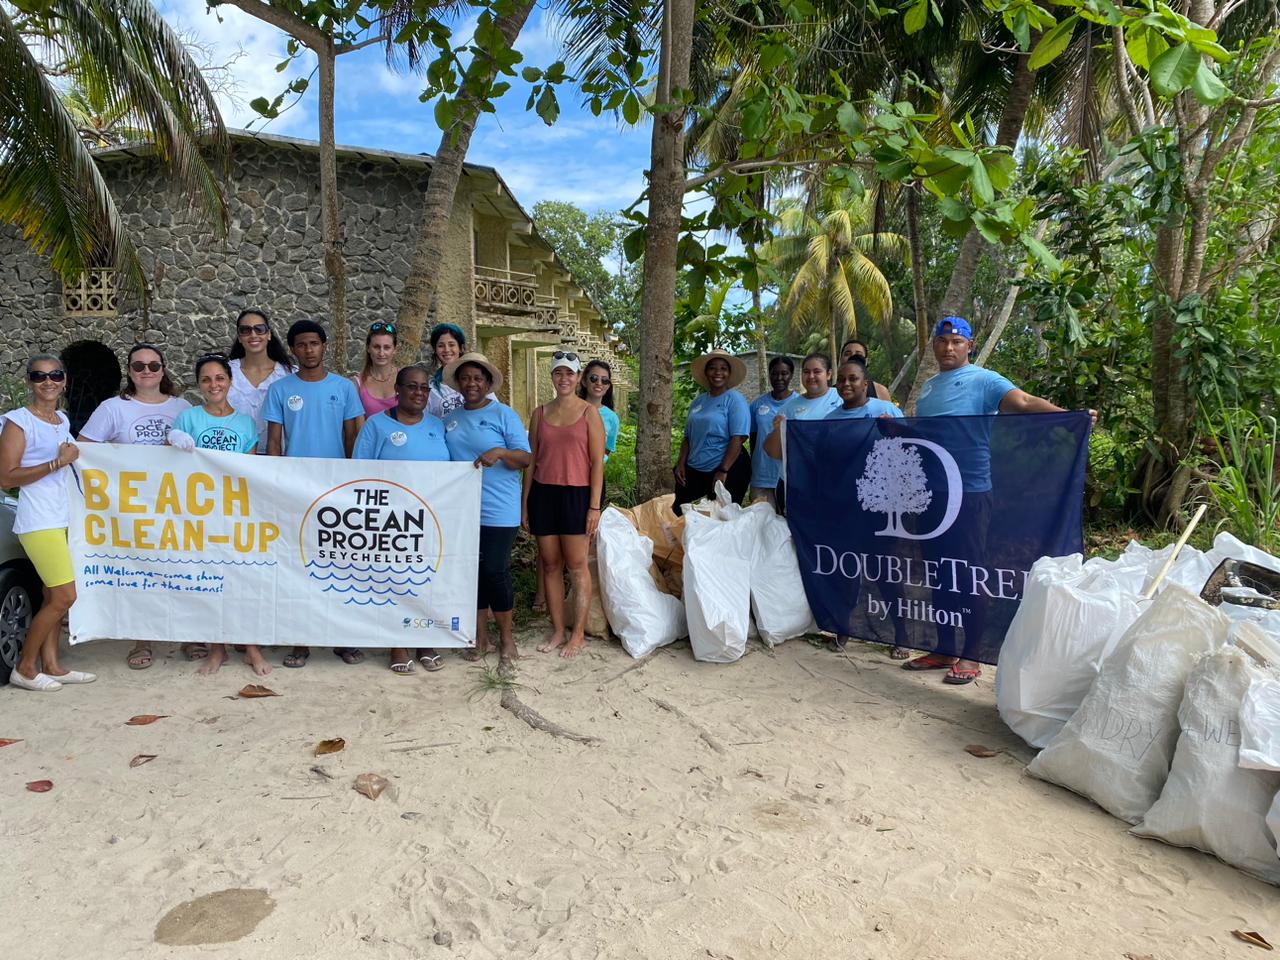 DoubleTree by Hilton - Clean Up Group Photo on the beach